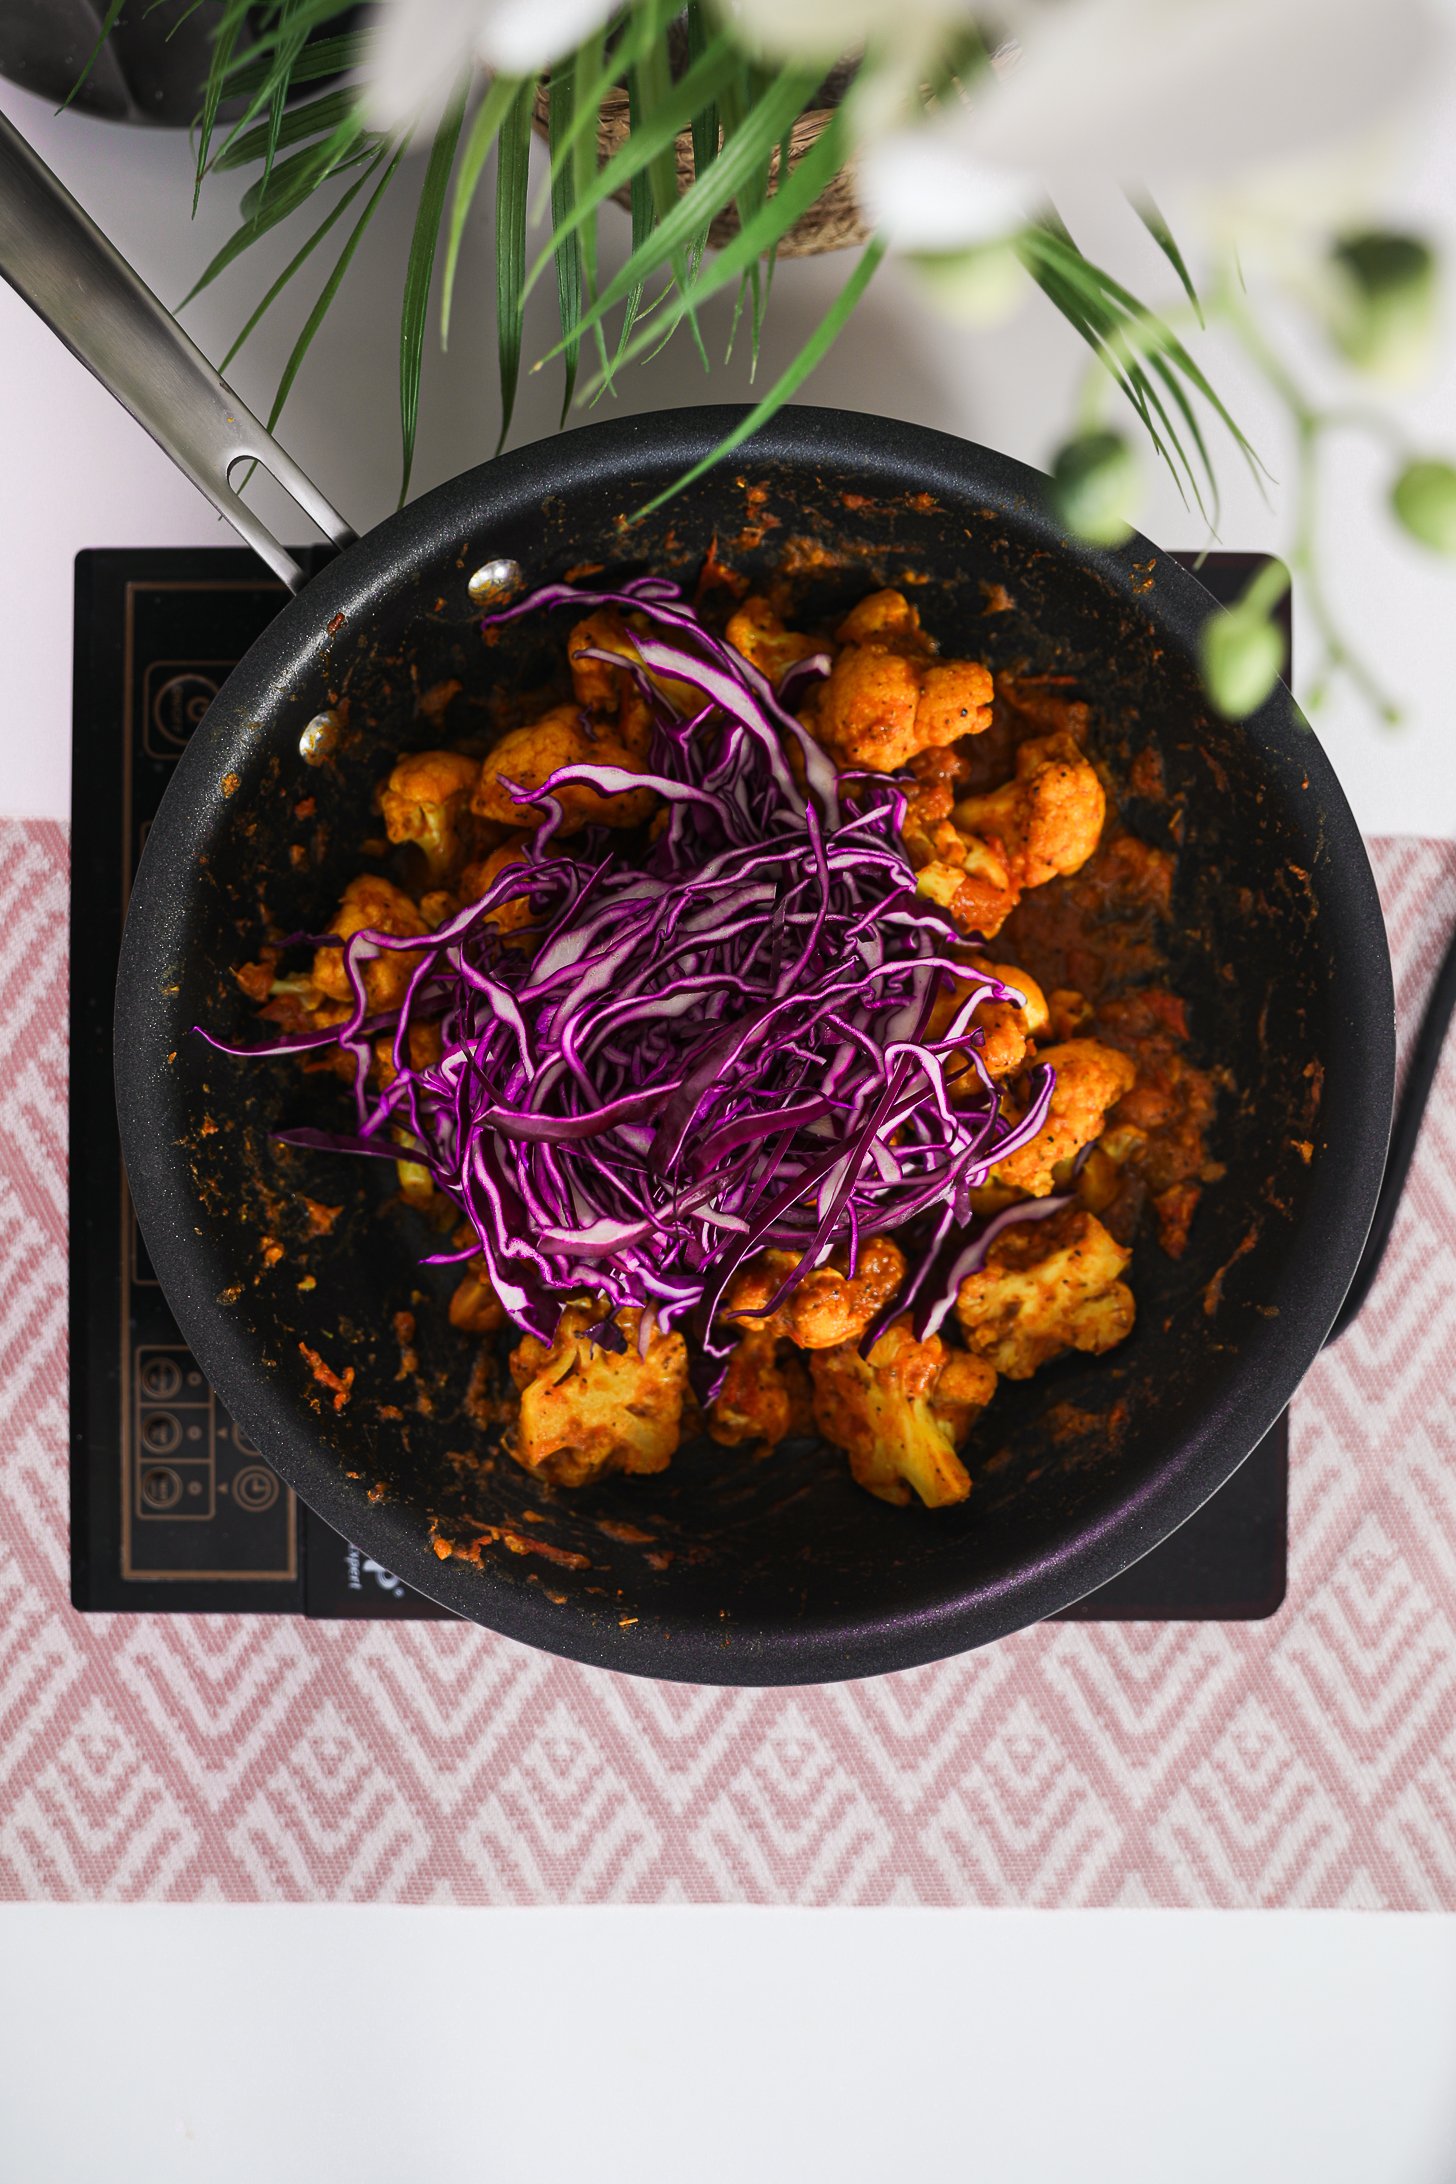 A pan of stir fried cauliflower topped with vibrant purple cabbage threads on a mobile worktop.